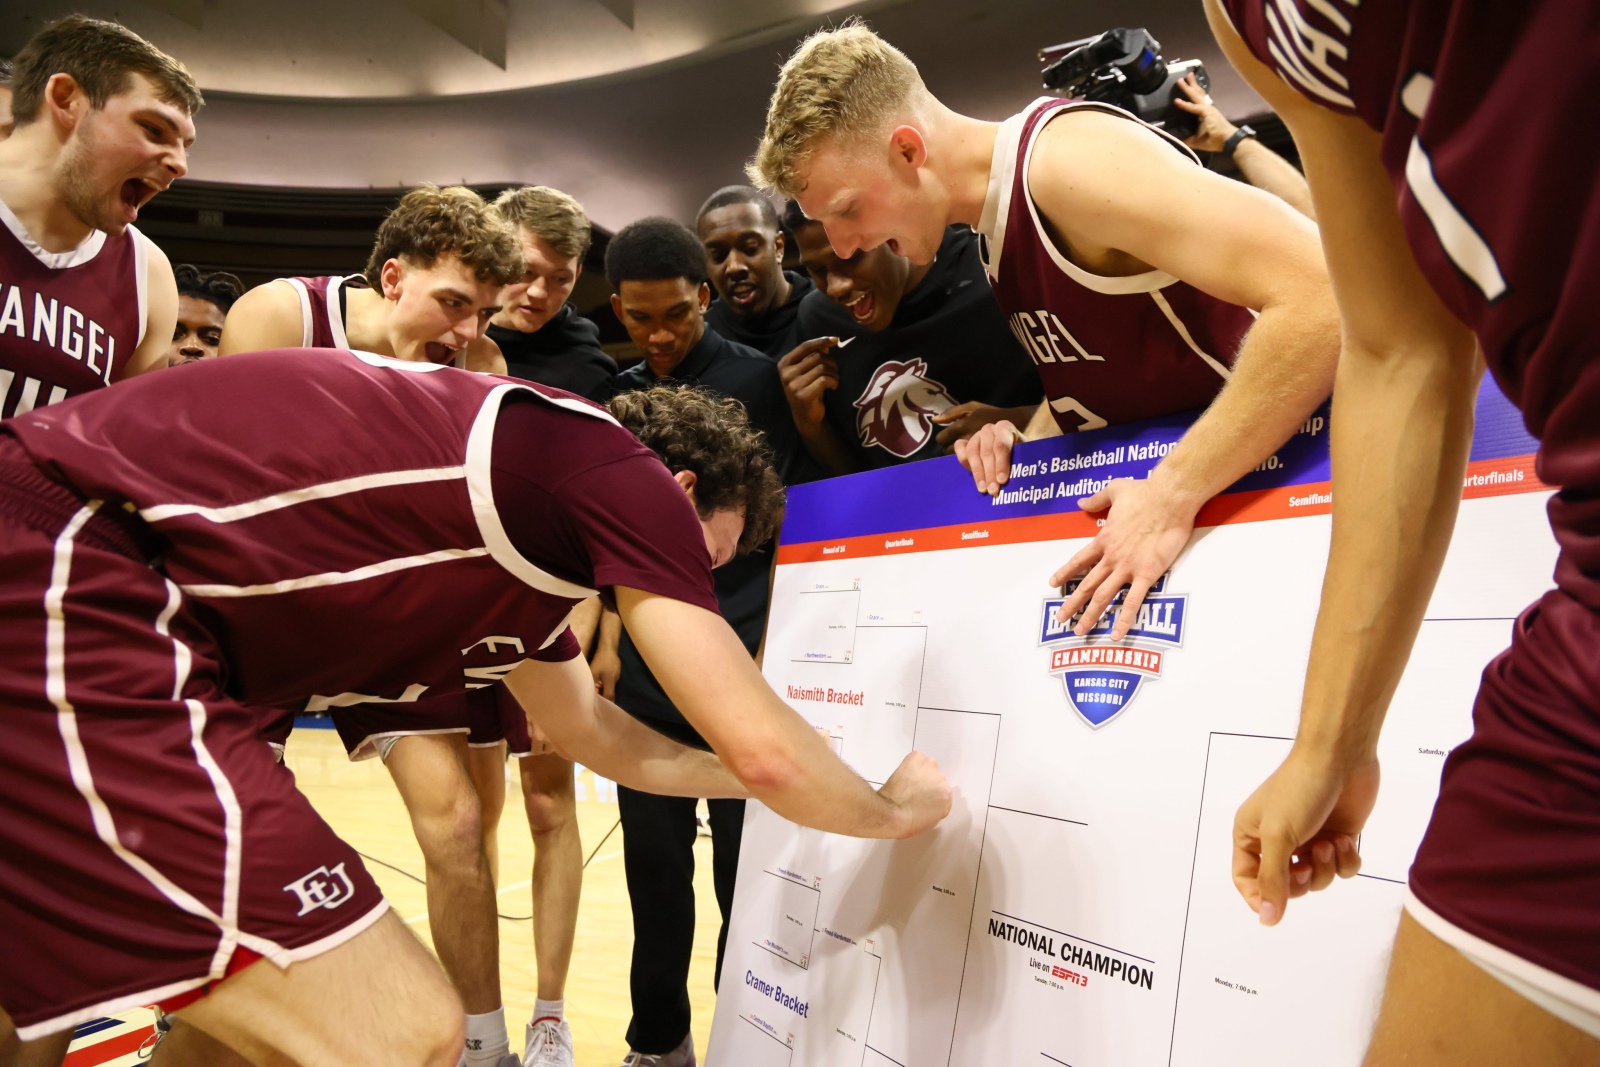 Evangel players stick their team’s name on the NAIA bracket round of eight following the victory over Lewis-Clark. (Photo by Evangel University Athletics)